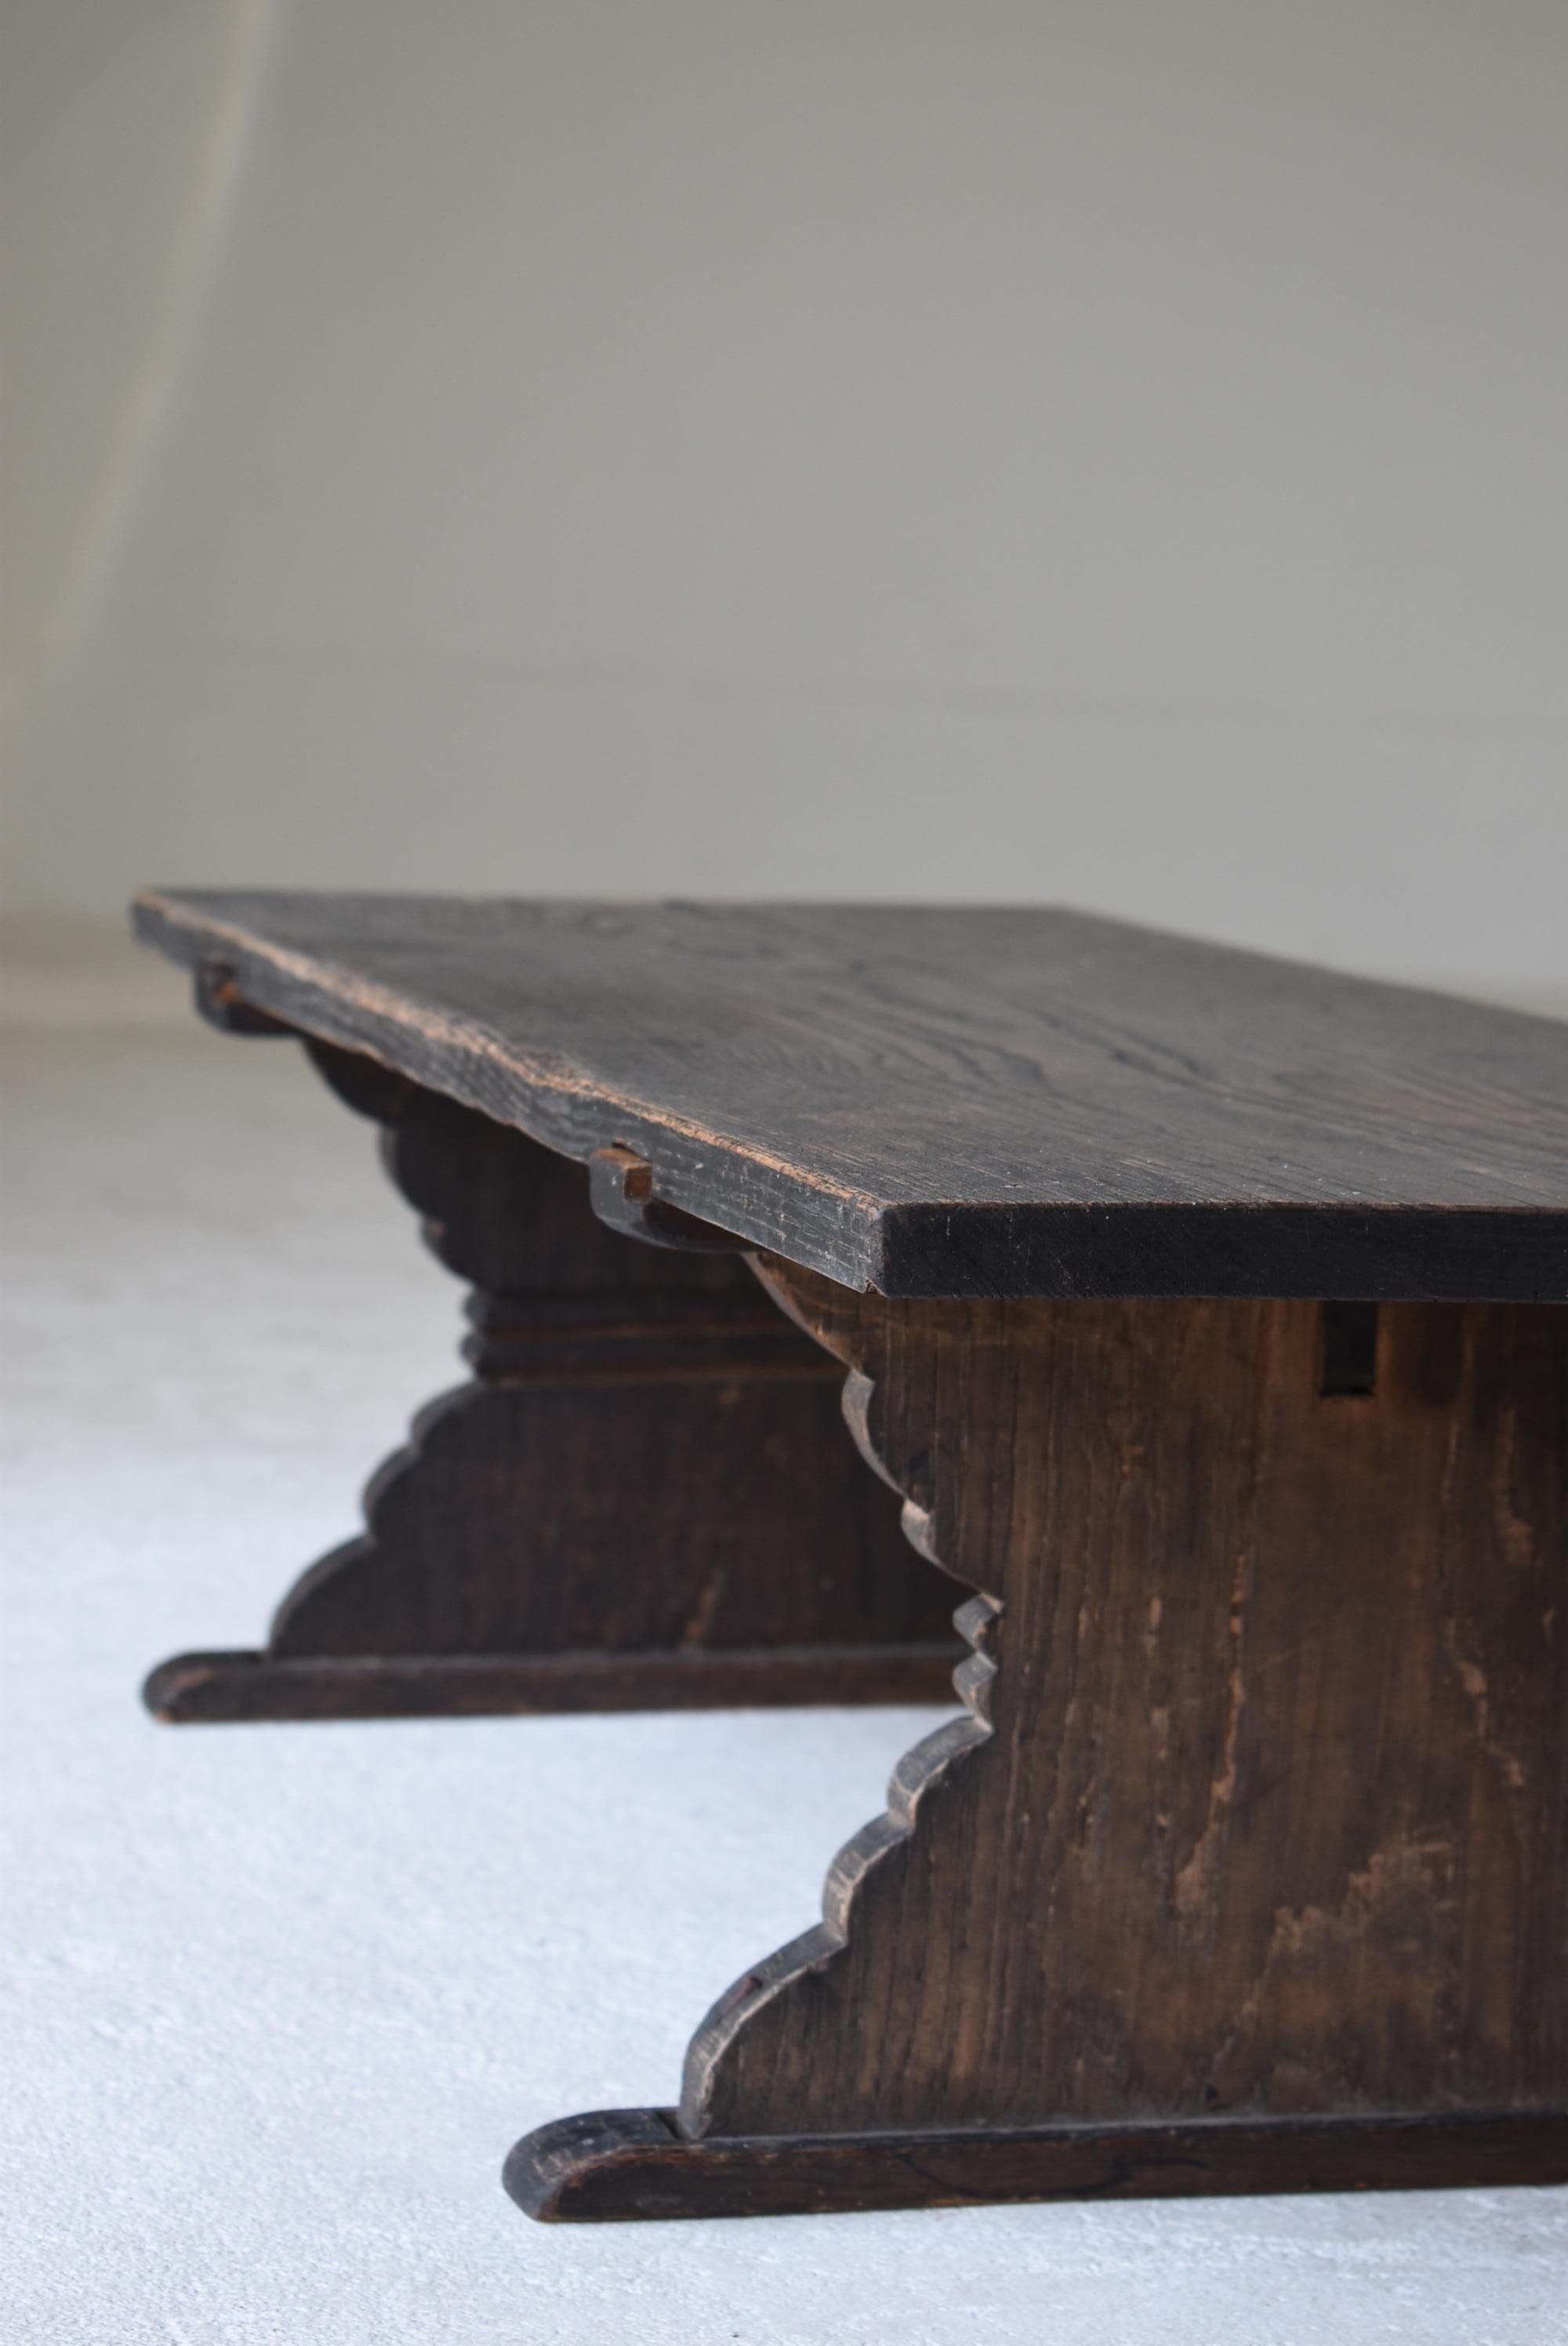 20th Century Japanese Old Low Table 1860-1920s/Antique Desk Sofa Table Coffee Table Wabisabi